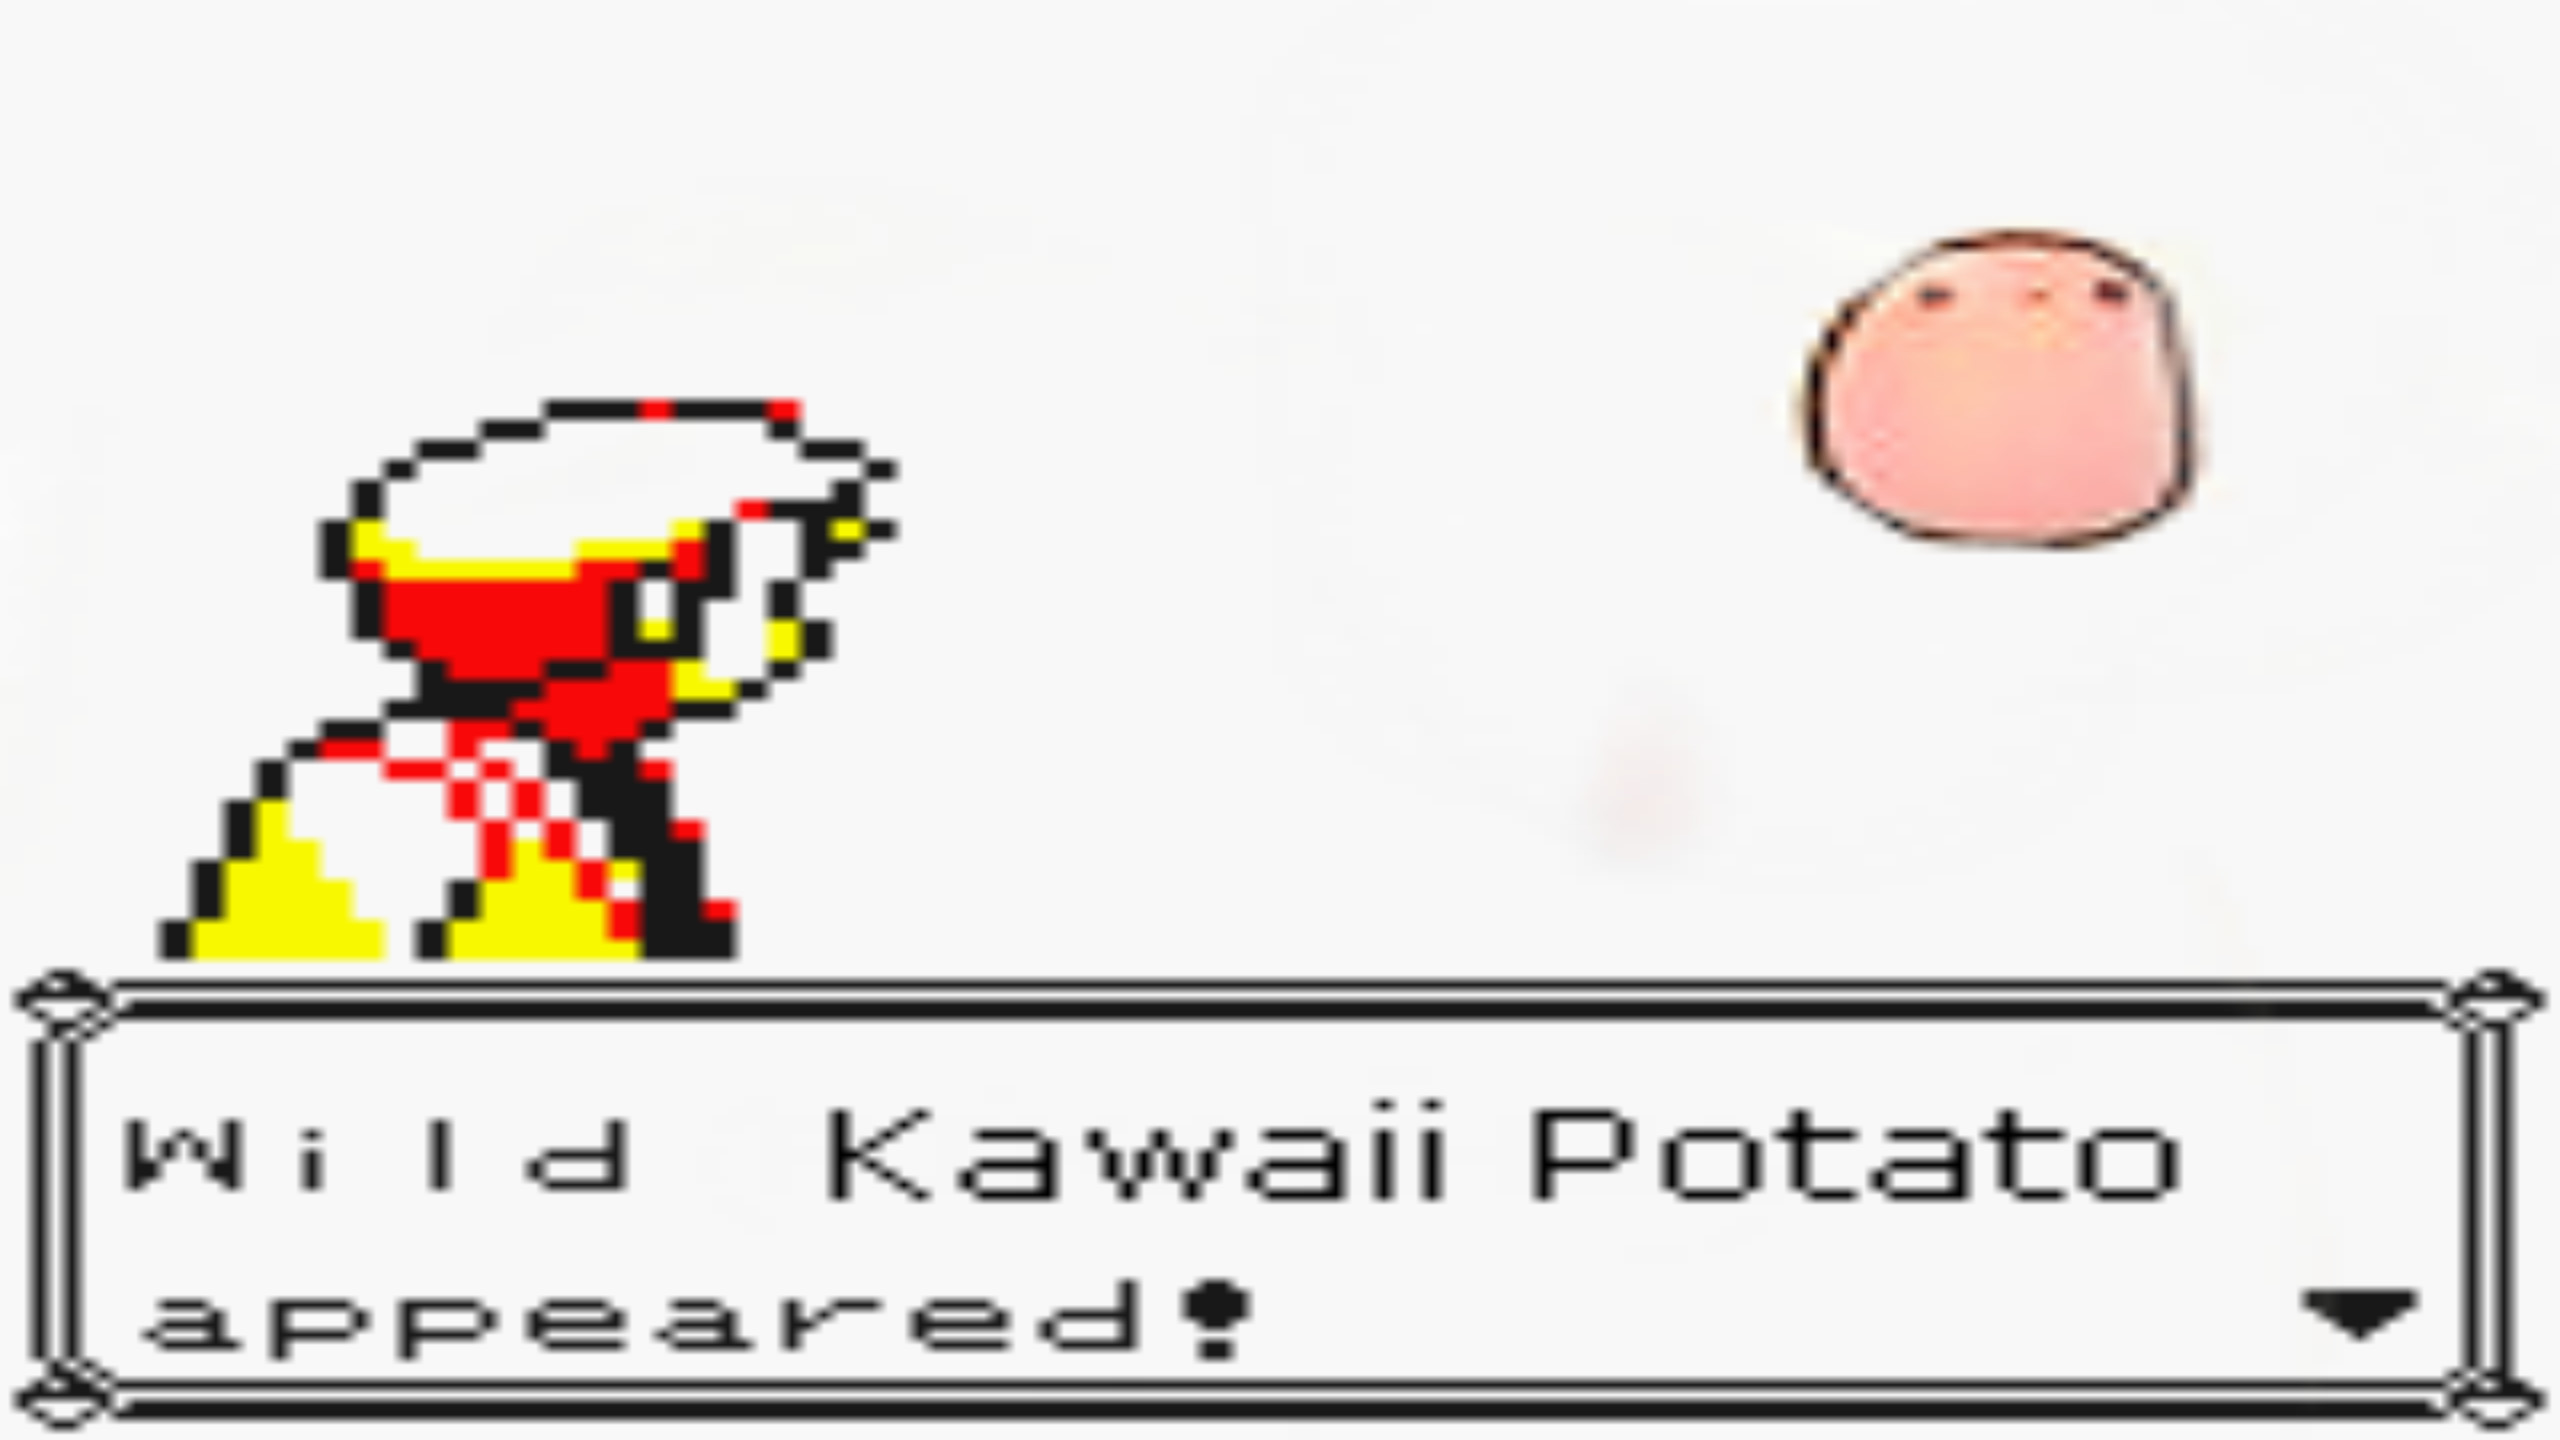 … A Wild Kawaii Potato Appeared! by Will94182